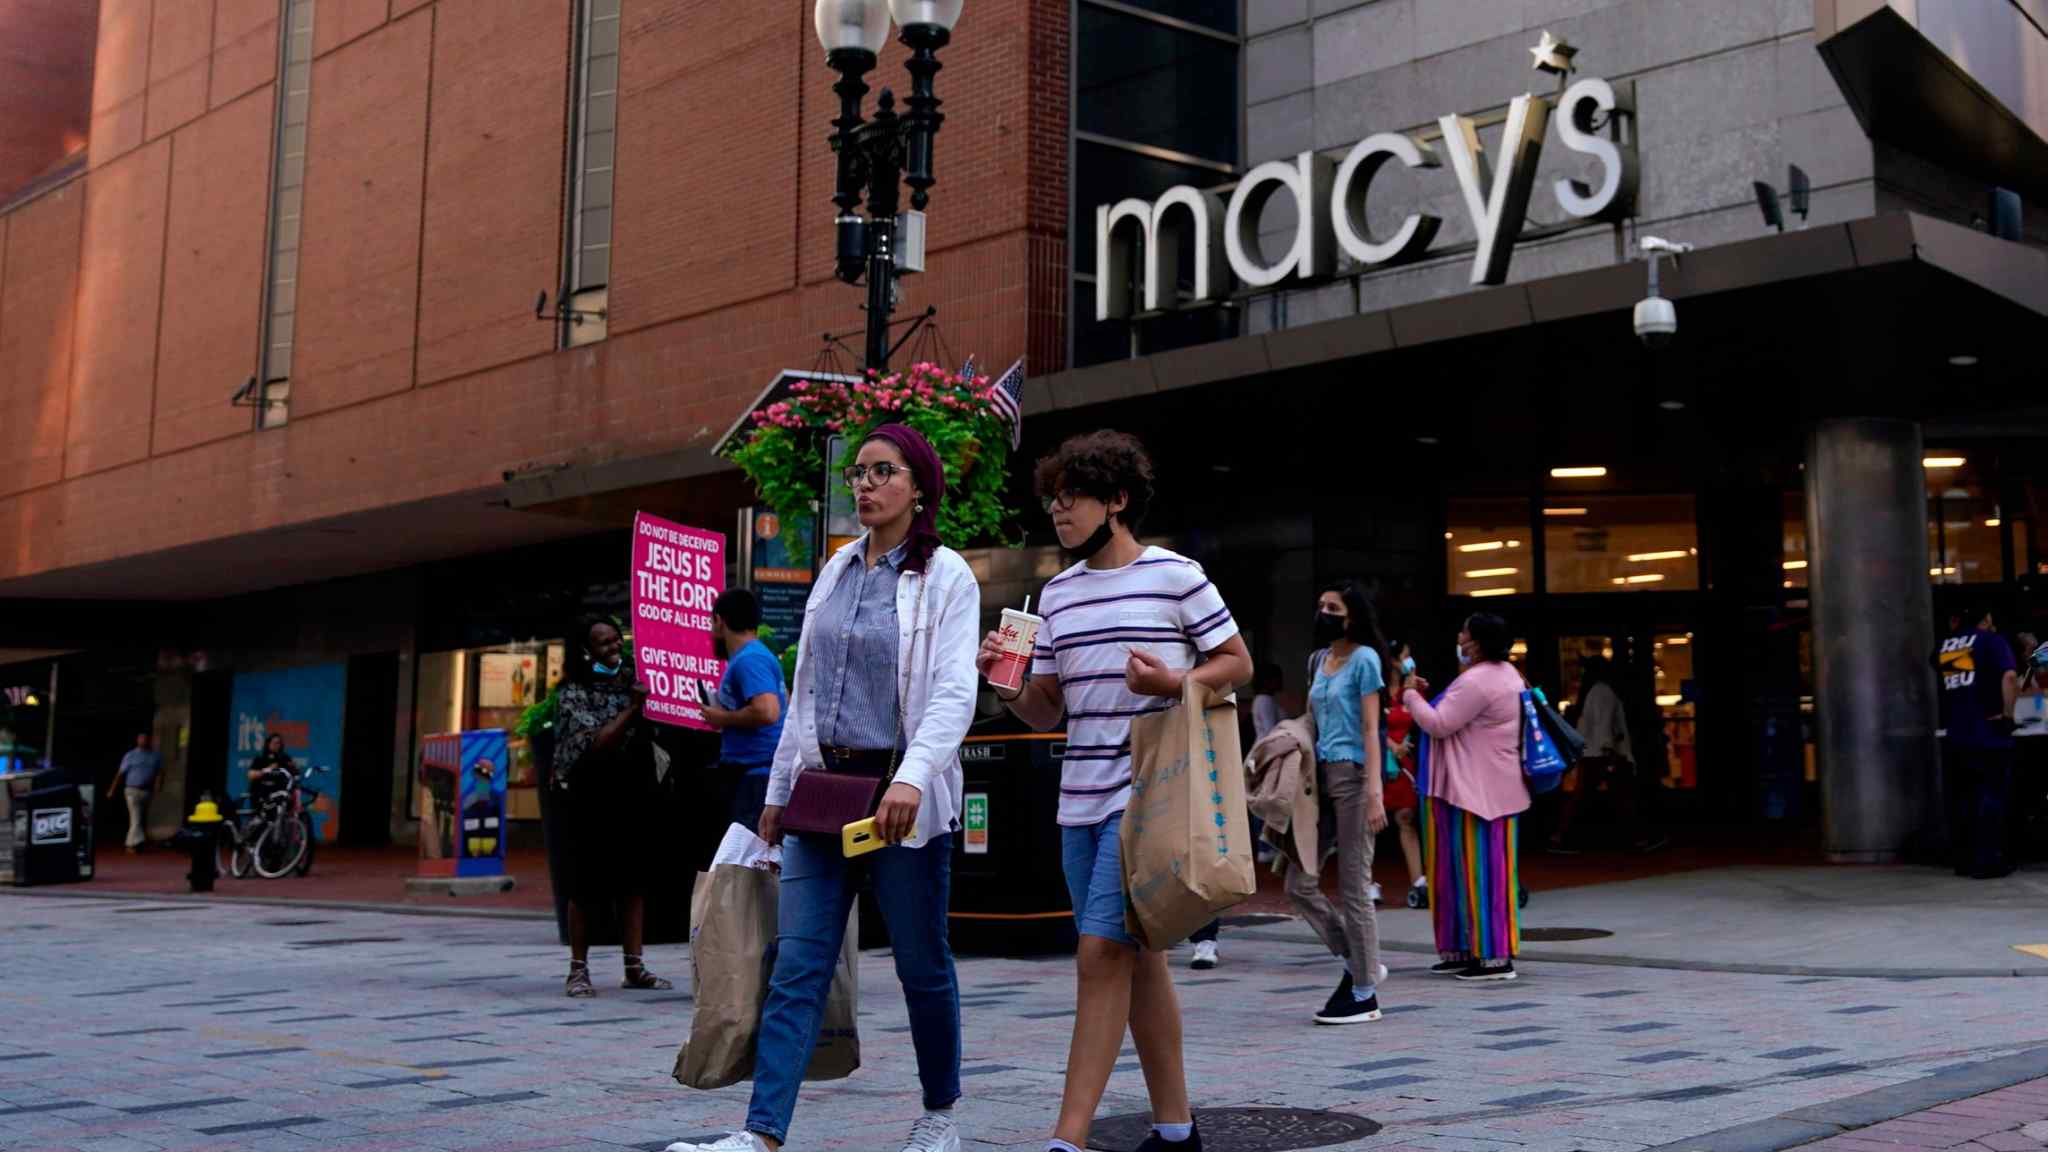 Macy’s and Dollar General warn on US consumer spending